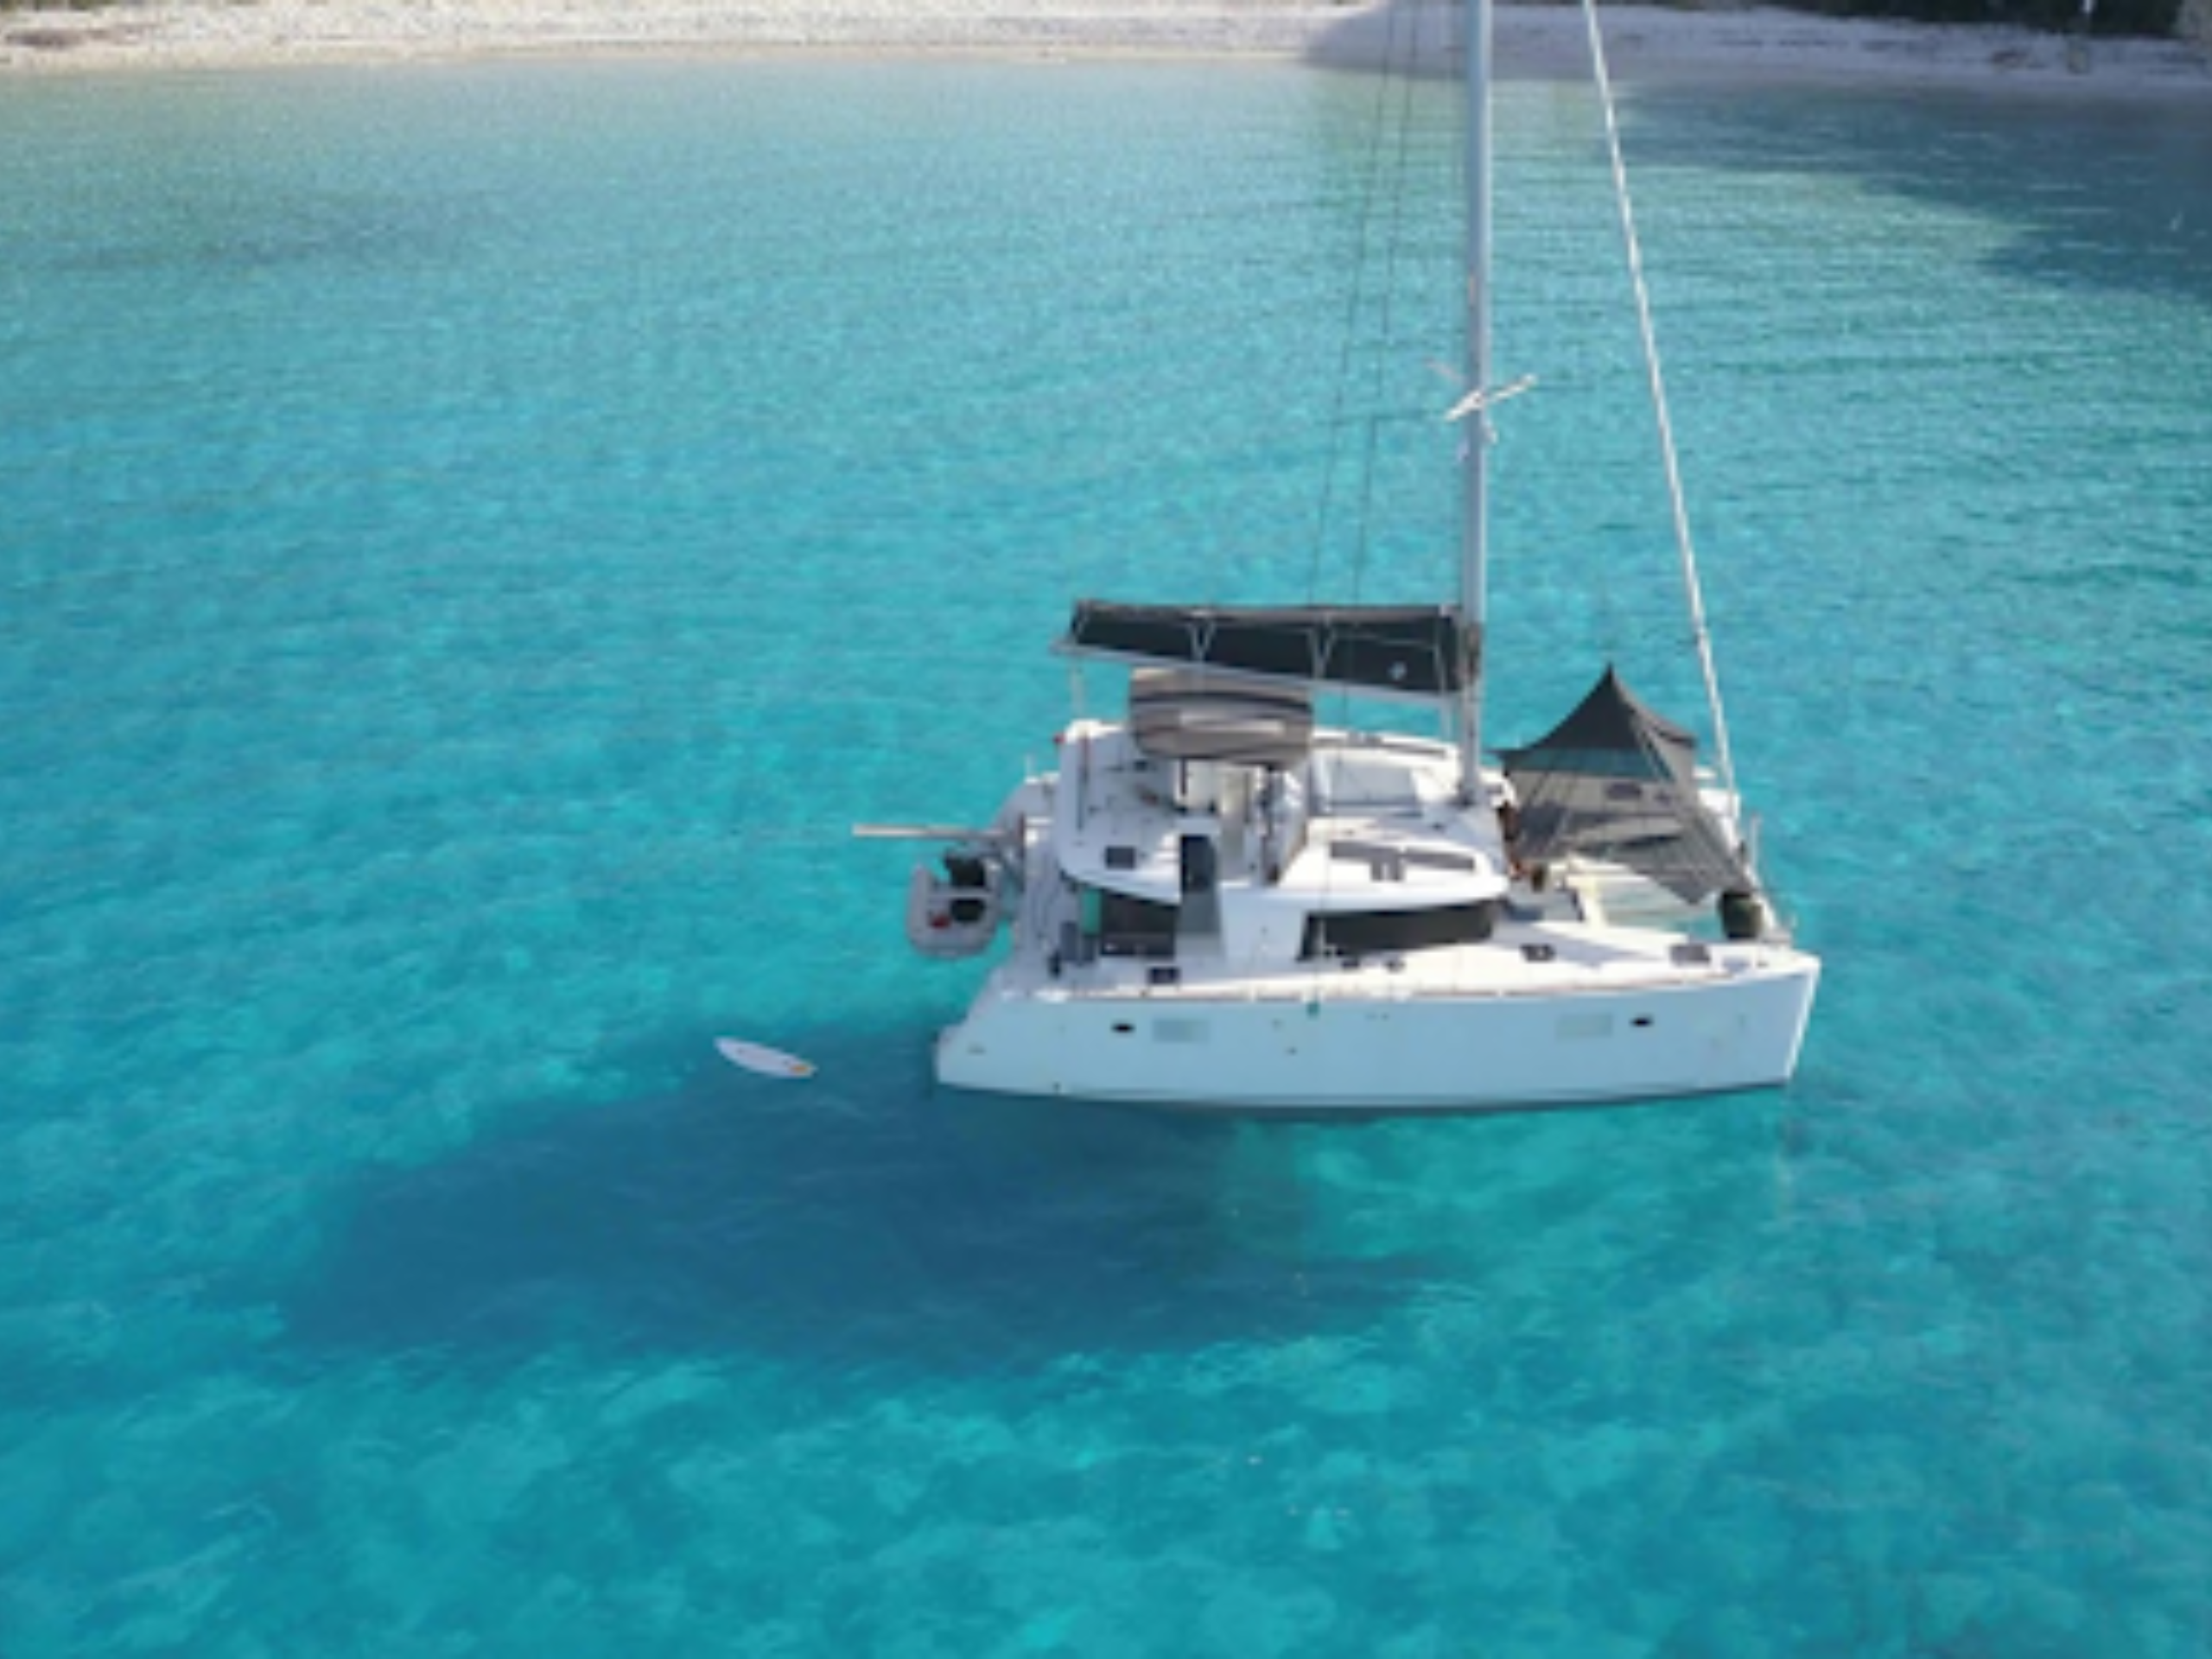 Are you feeling more comfortable now to charter a yacht for your next holiday?